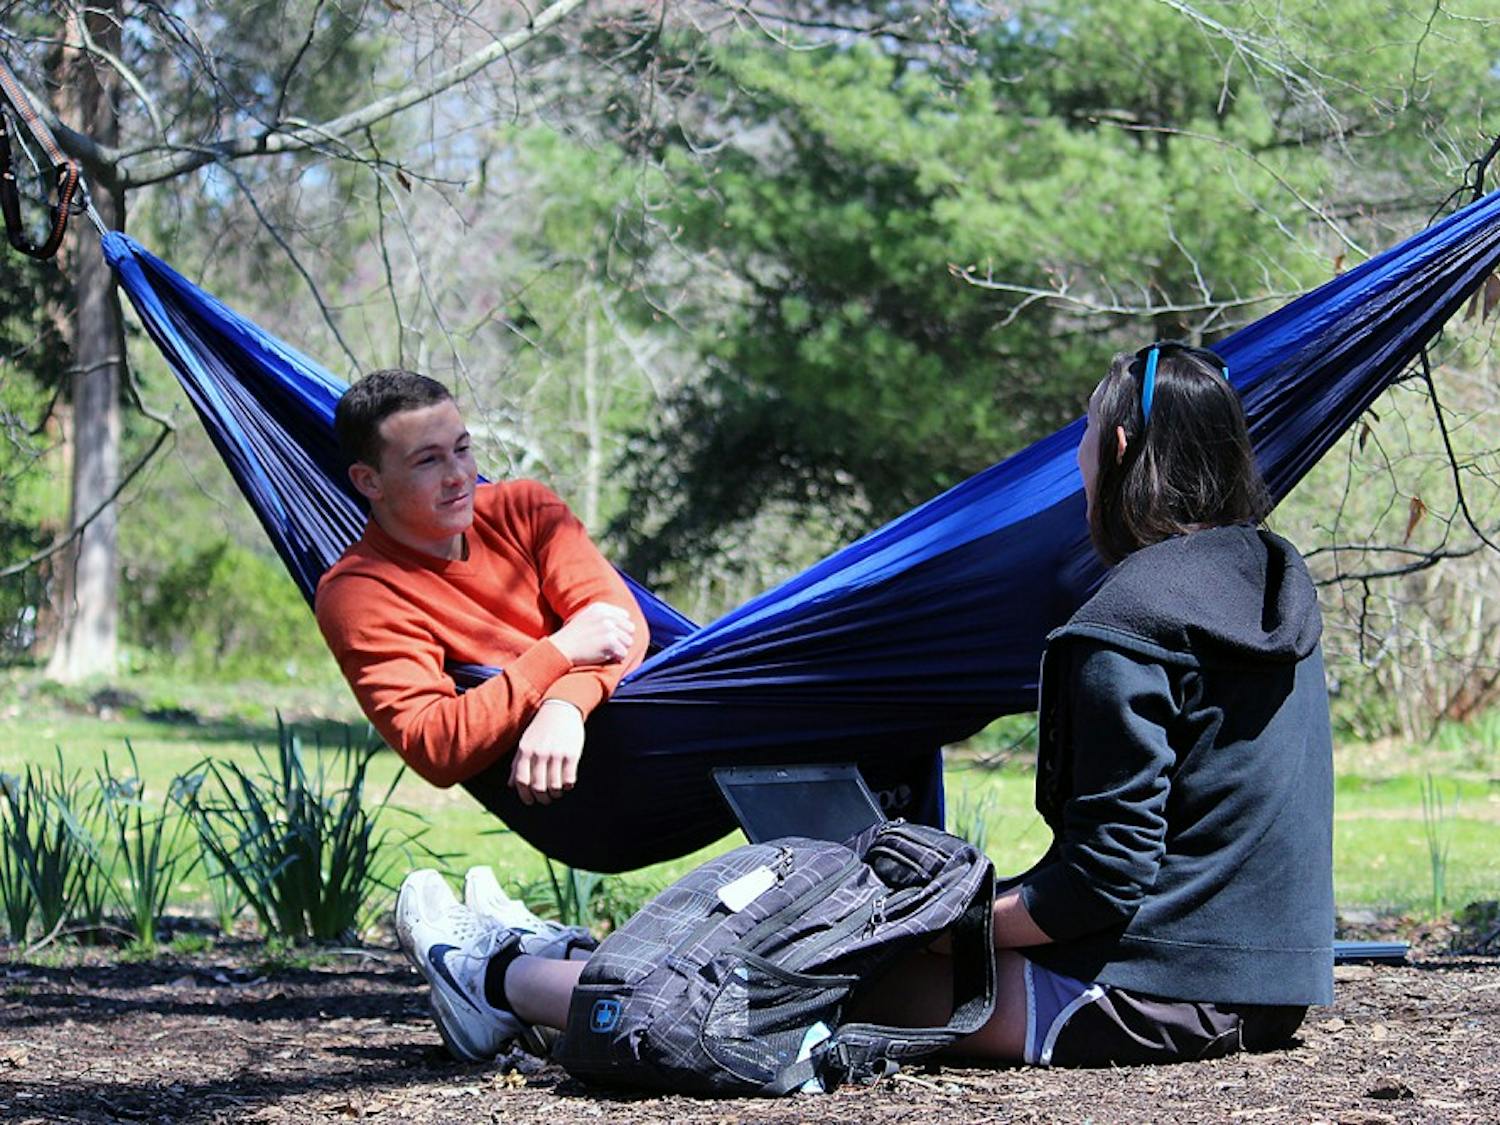 Patrick O'Neill, a sophomore business major, sits in his hammock in the Arboretum on Monday afternoon with Rachel Helms, a junior psychology major. 